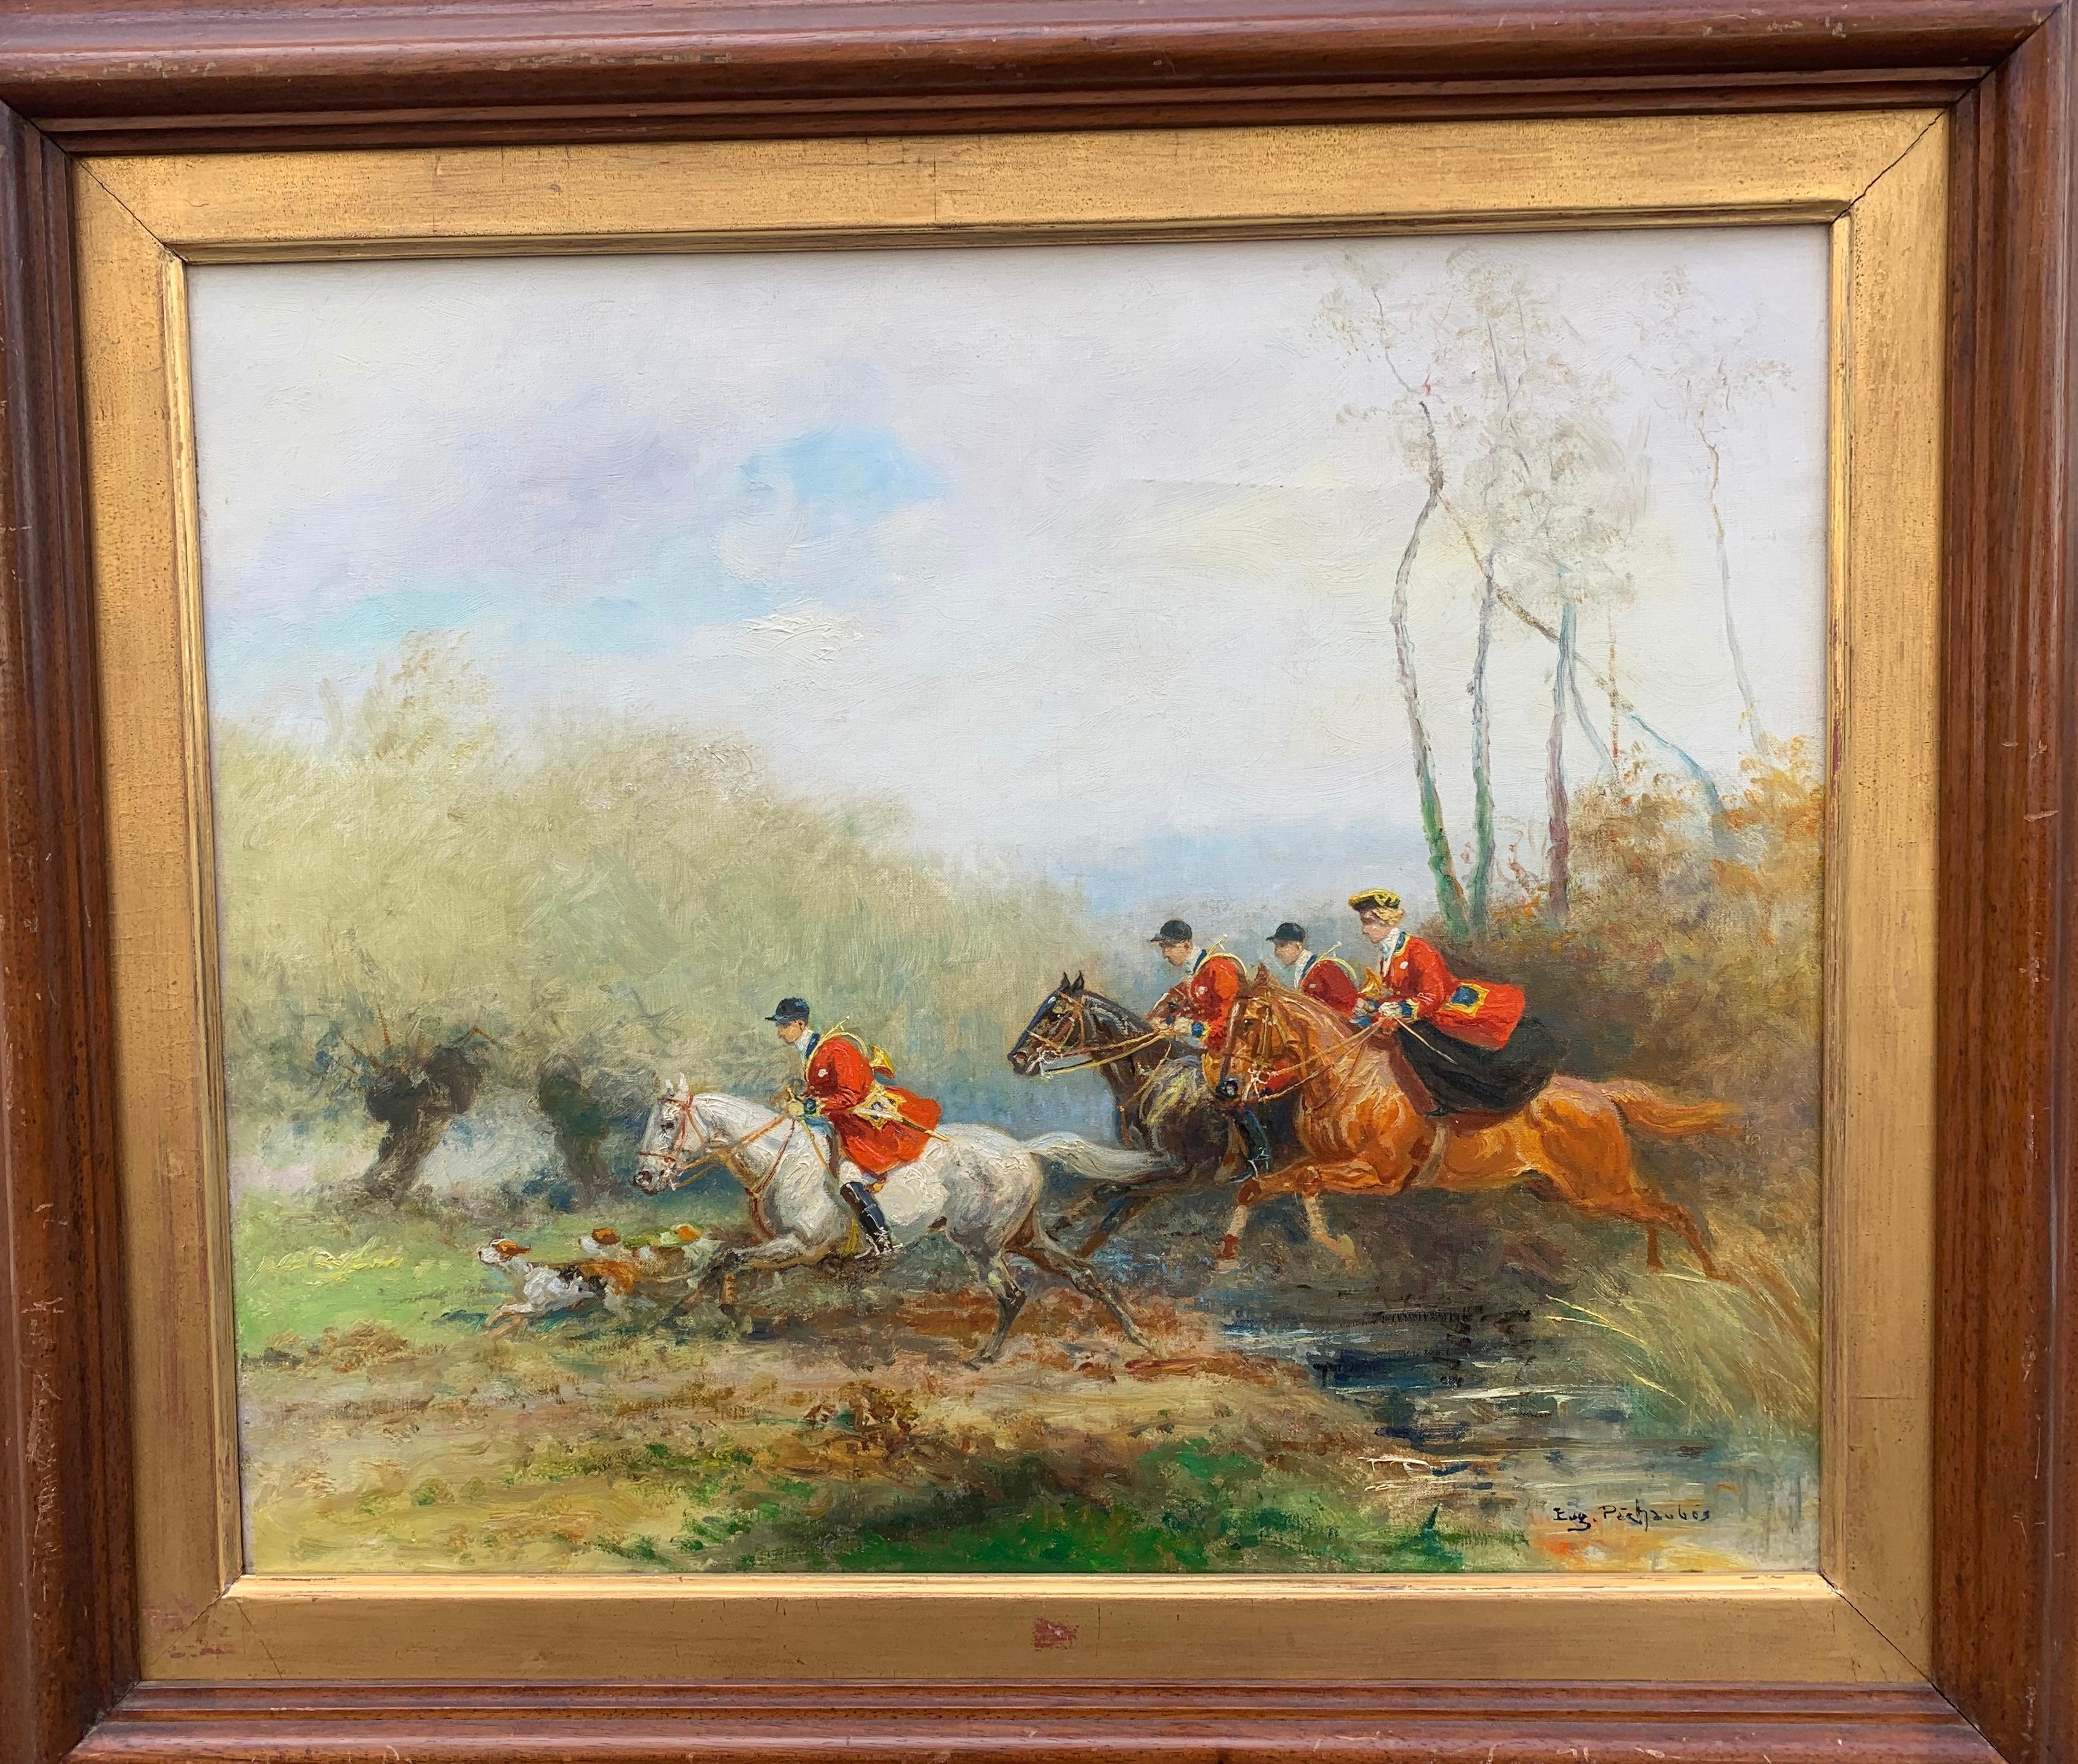 The Hunting with Hounds Huile sur toile d'Eugene Pechaubes circa 1935 en vente 2